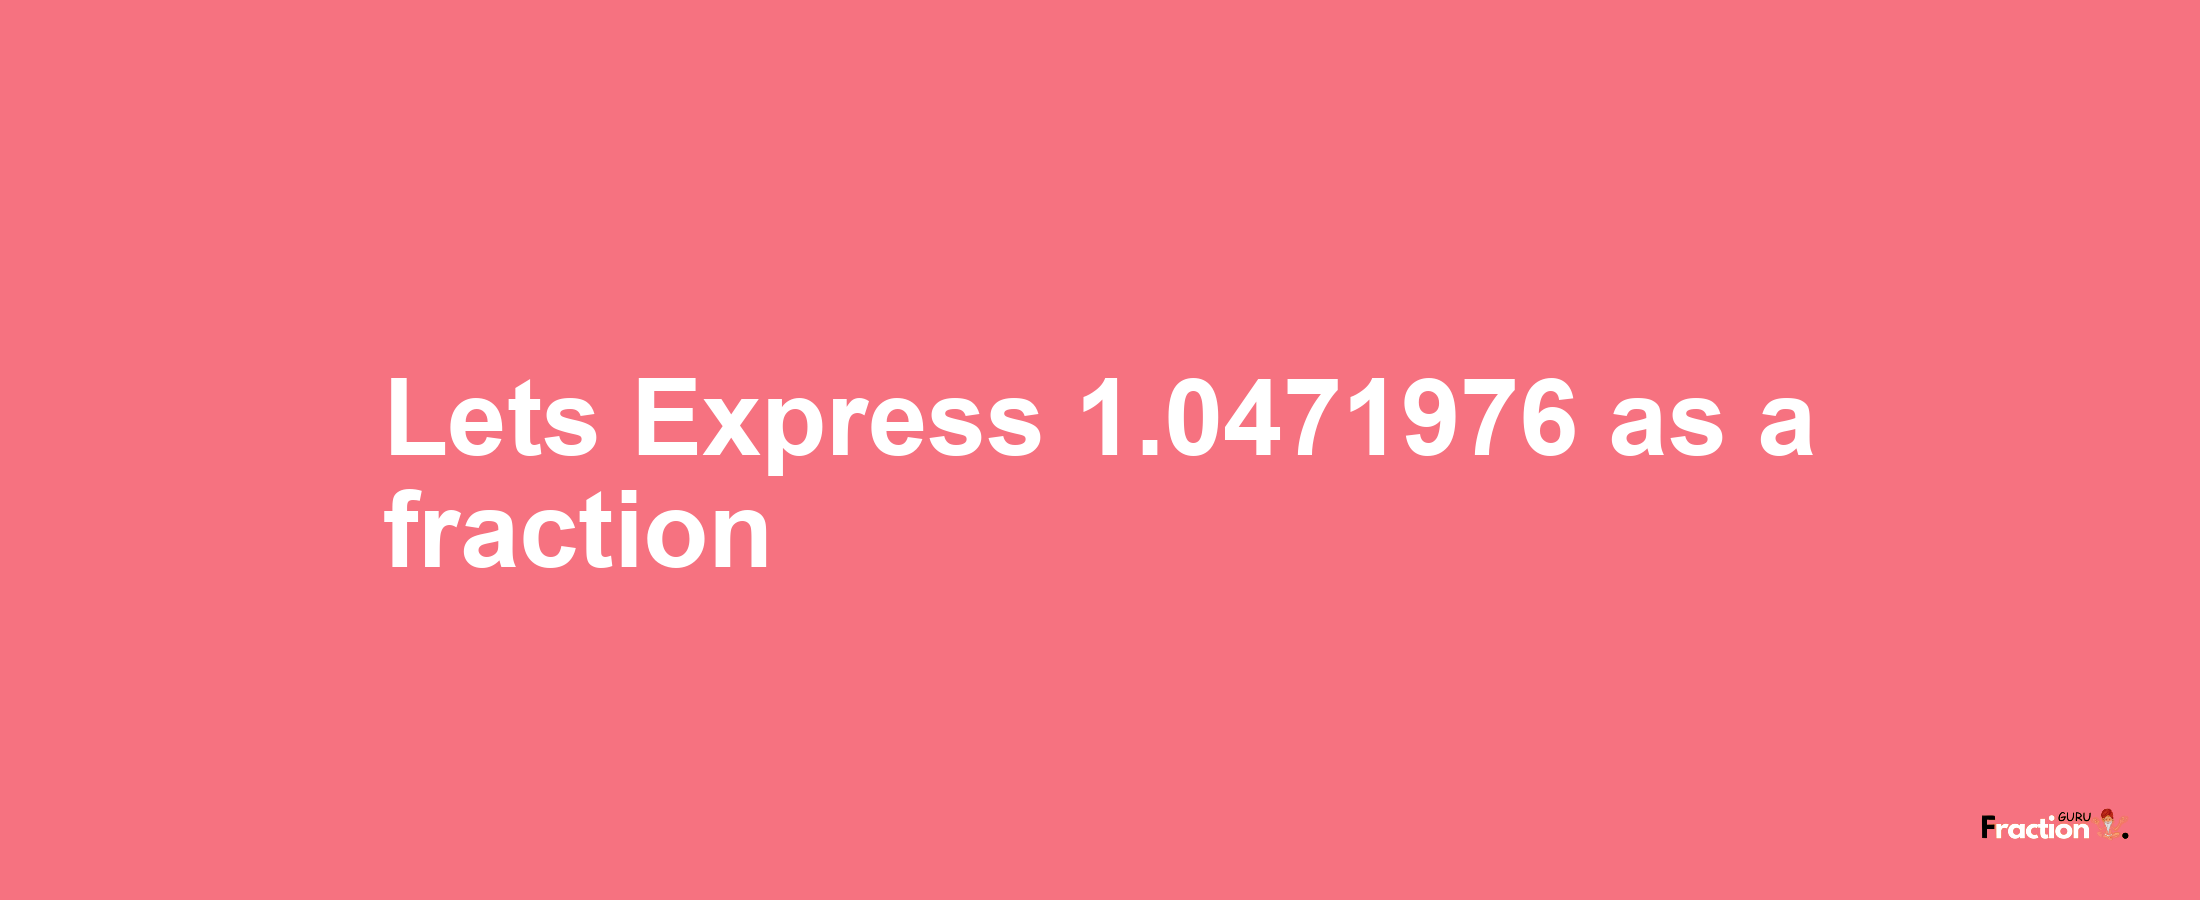 Lets Express 1.0471976 as afraction